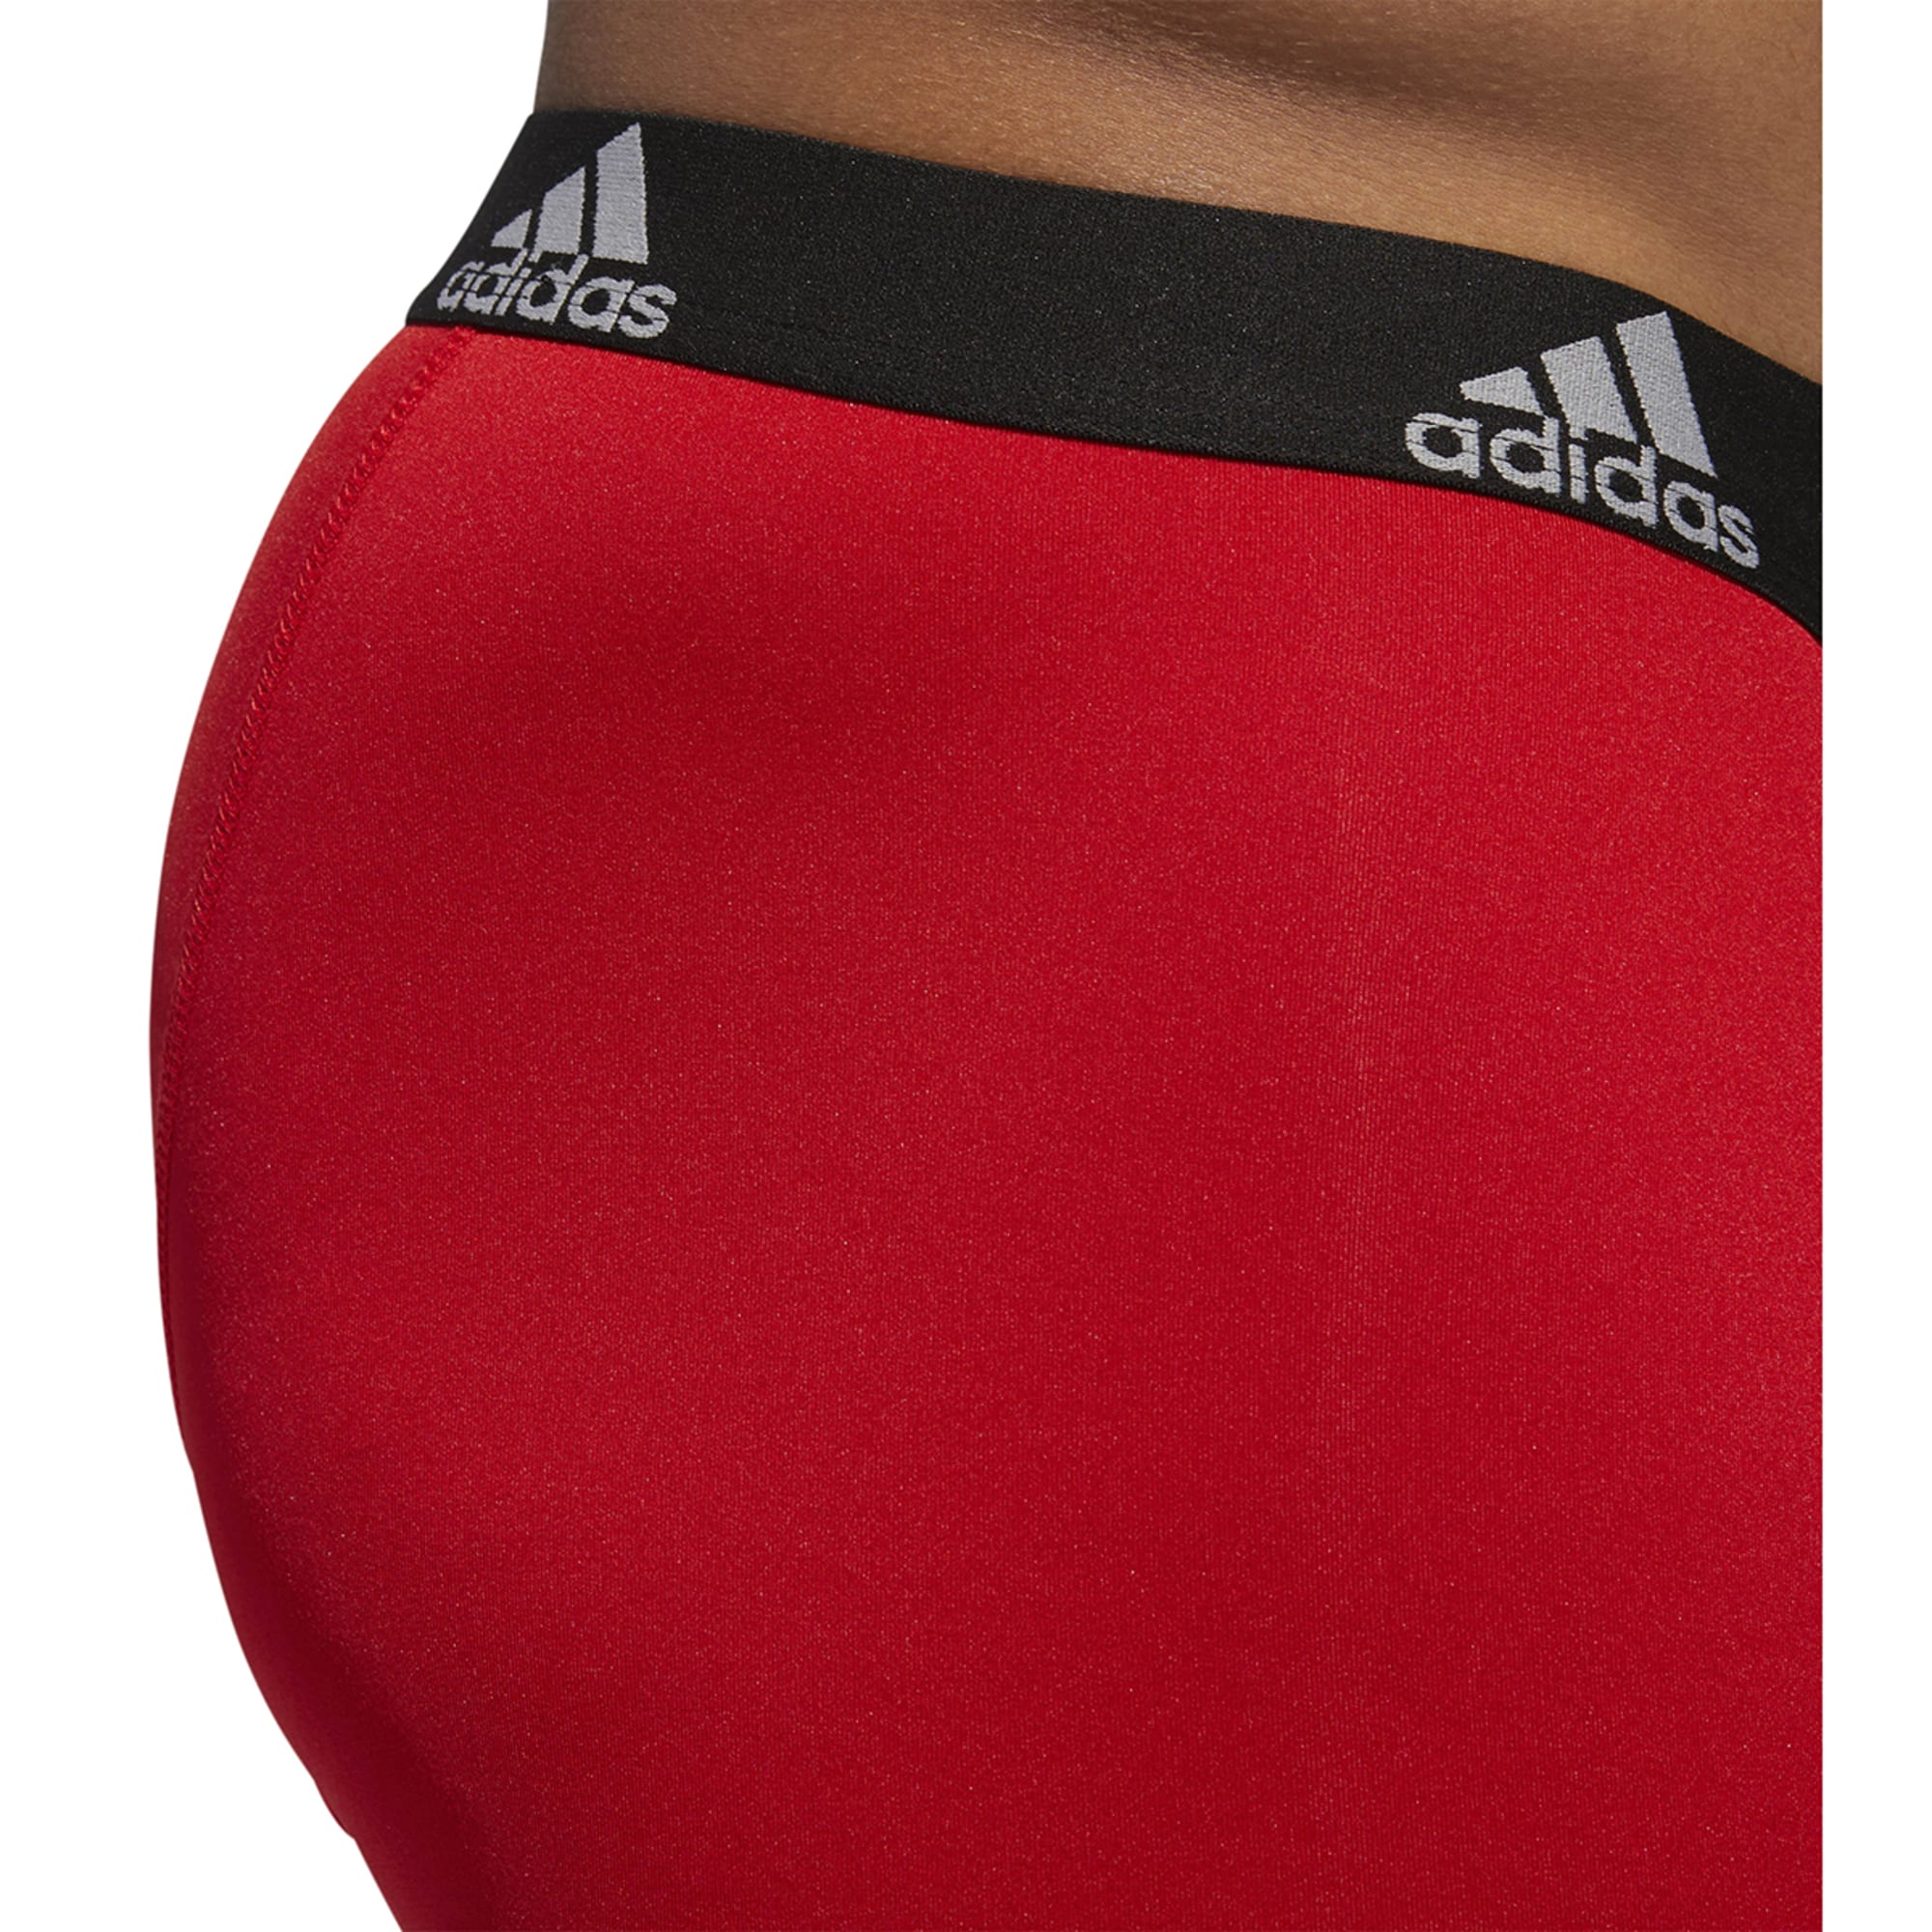 adidas Performance Long Boxer Briefs 3 Pairs - Red, Men's Training